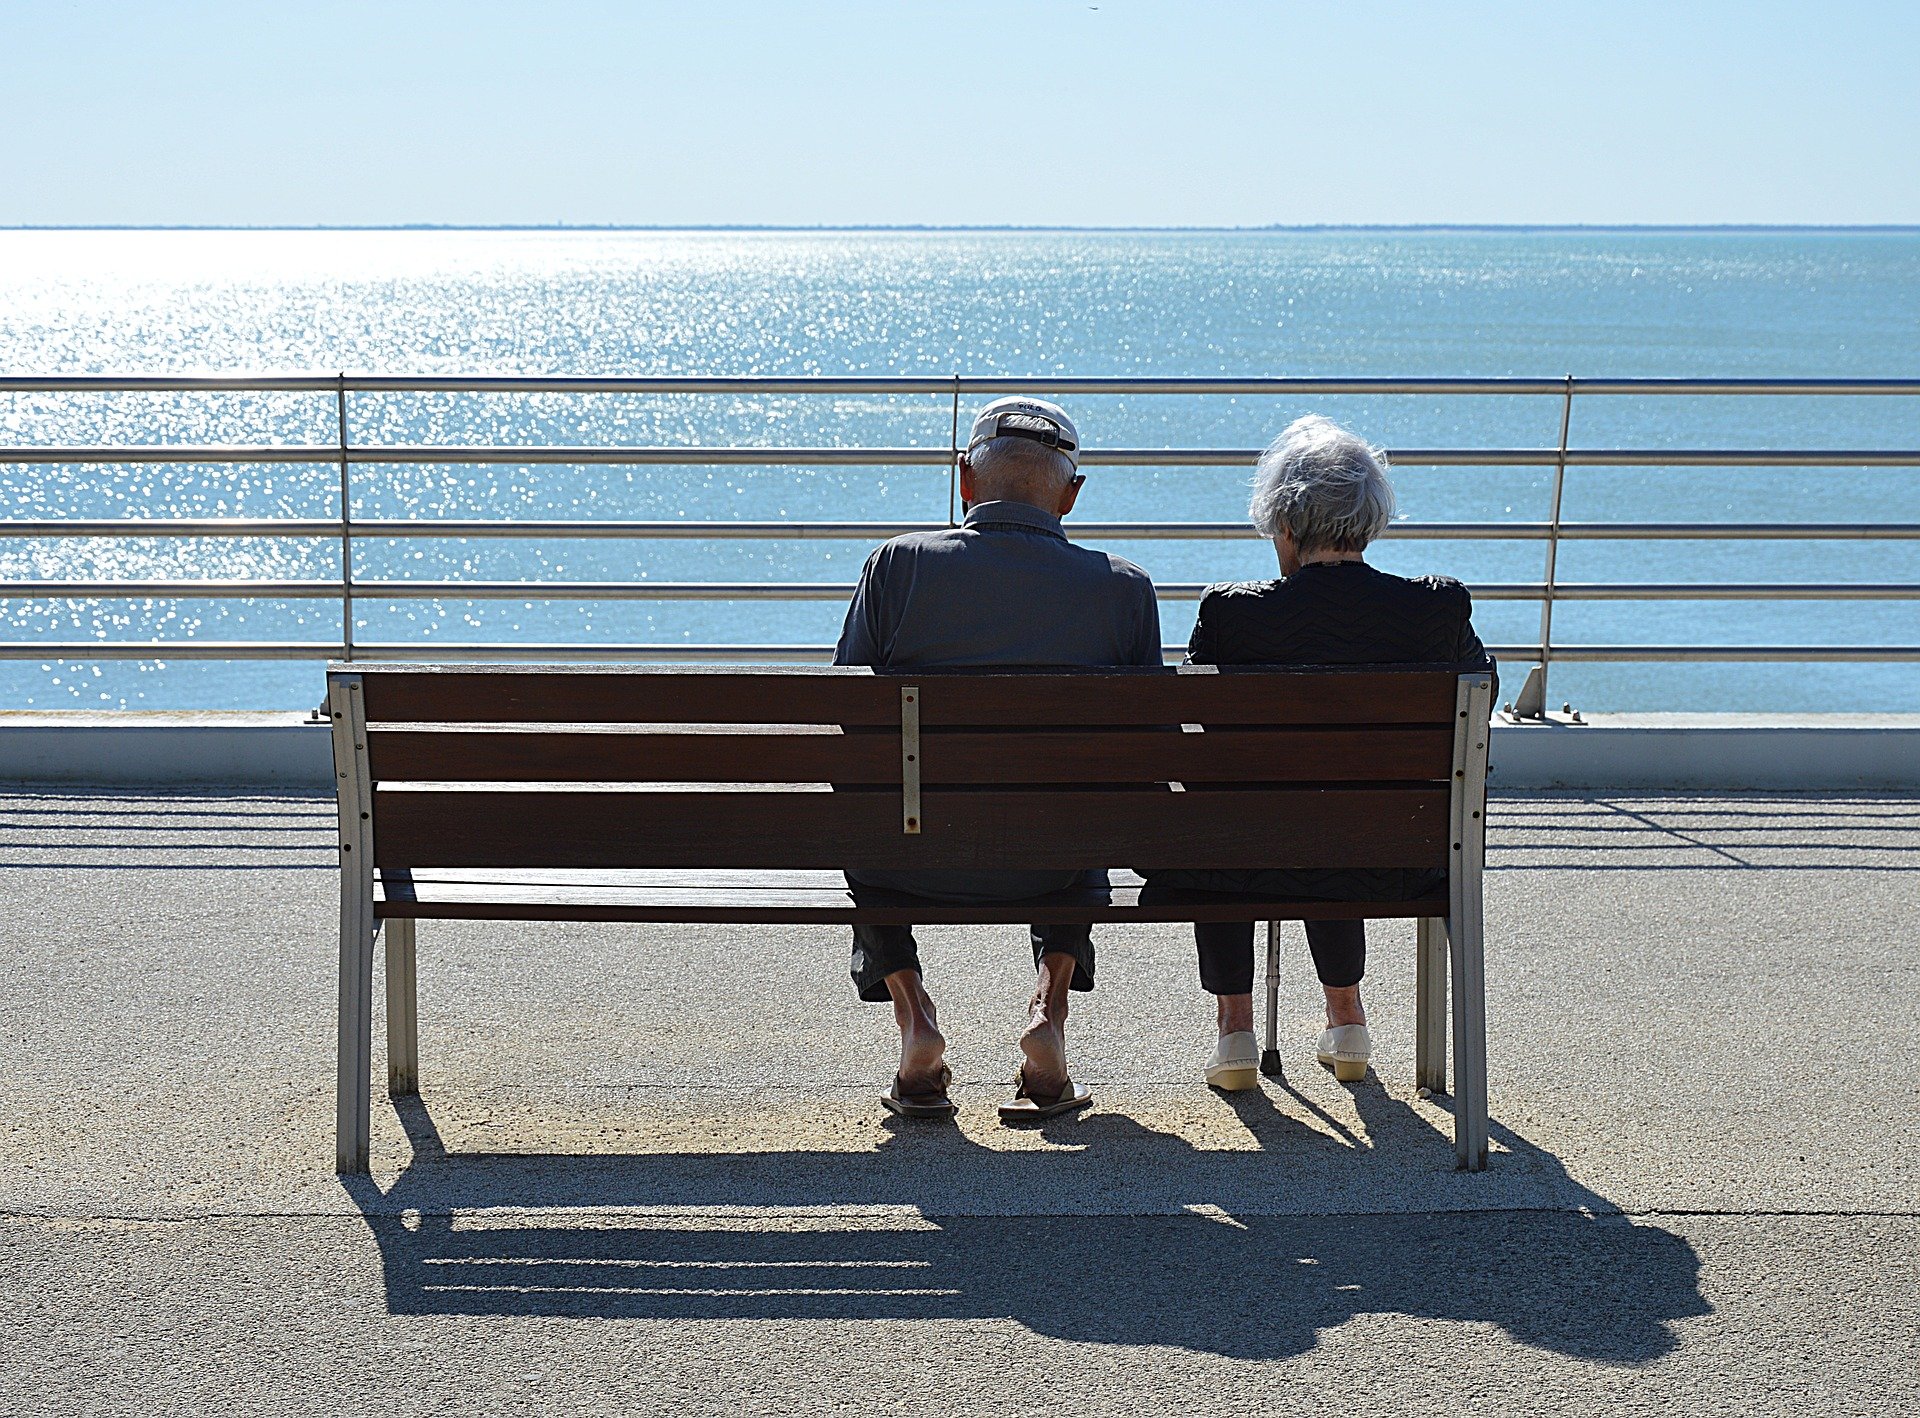 An elderly couple sitting by the sea. | Source: Pixabay